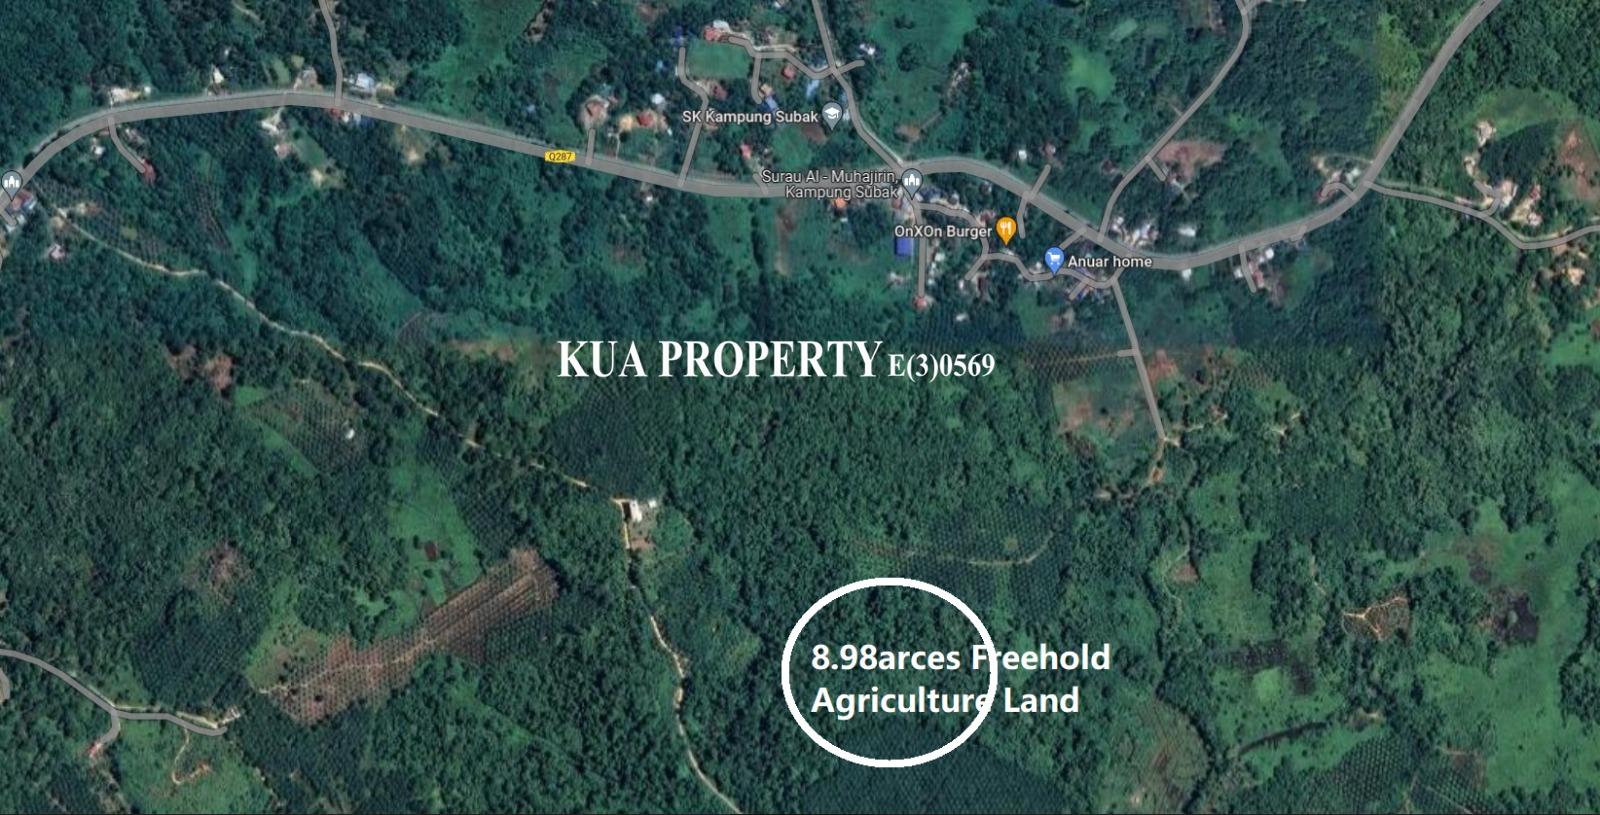 Freehold Agriculture Land For Sale at Bekenu near SK Kampung Subak